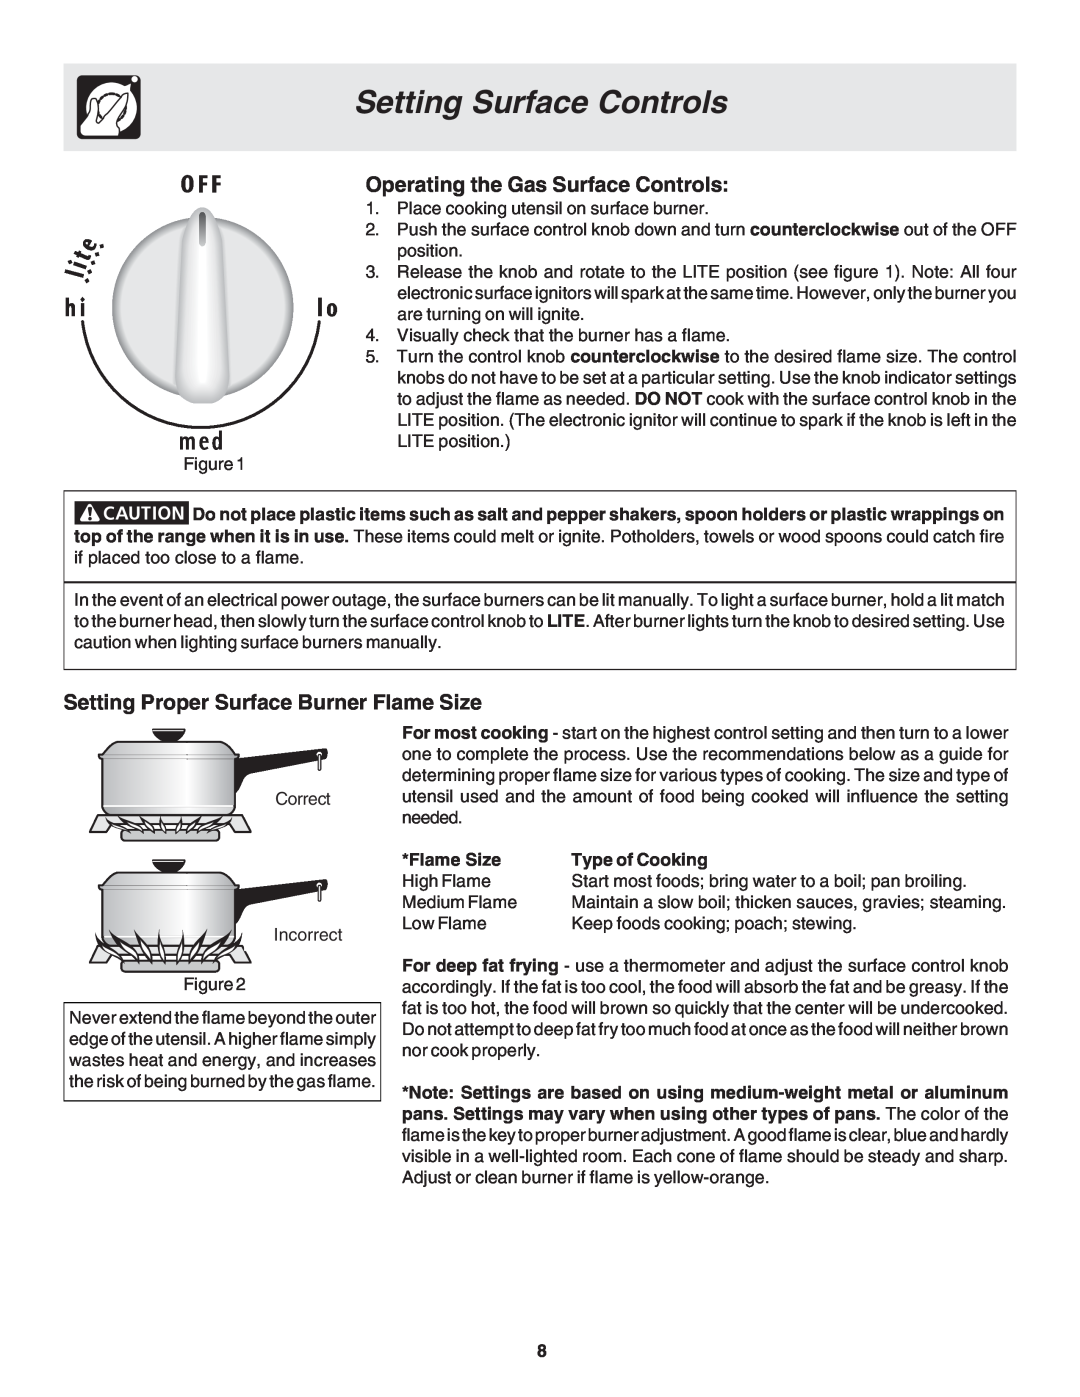 Frigidaire 318203875 warranty Setting Surface Controls, Operating the Gas Surface Controls, Flame Size, Type of Cooking 